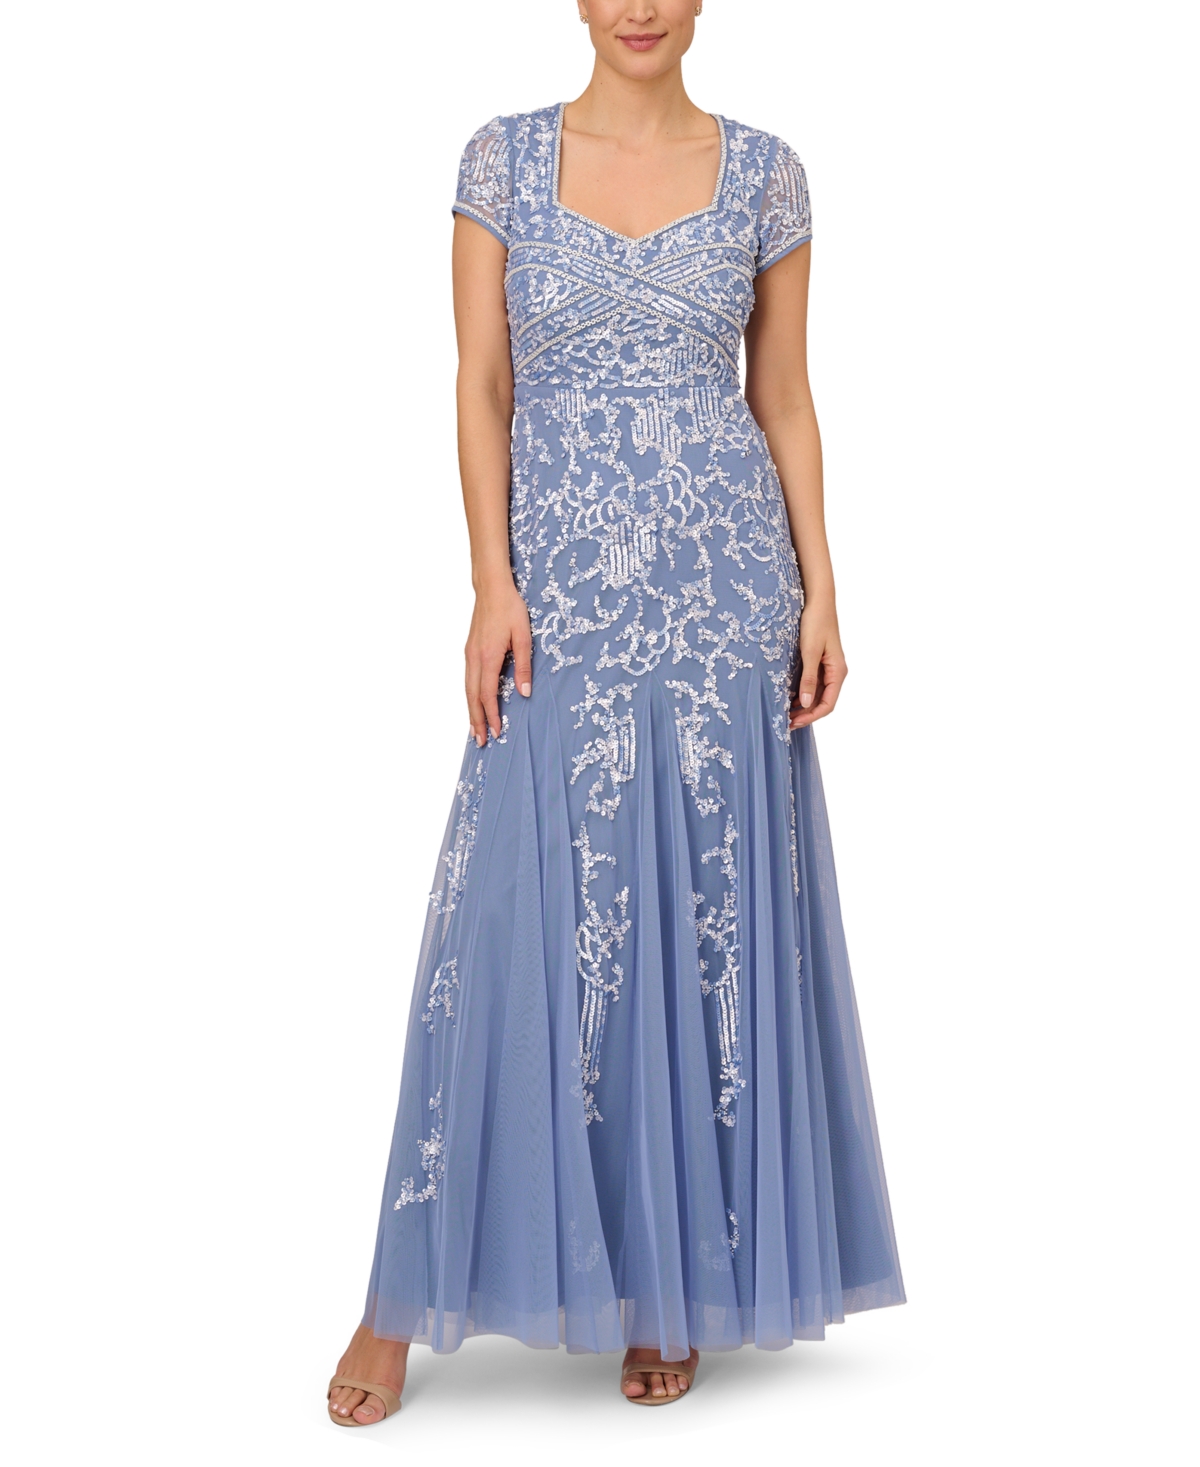 1920s Downton Abbey Dresses Adrianna Papell Embellished Godet Gown - French Blue $349.00 AT vintagedancer.com